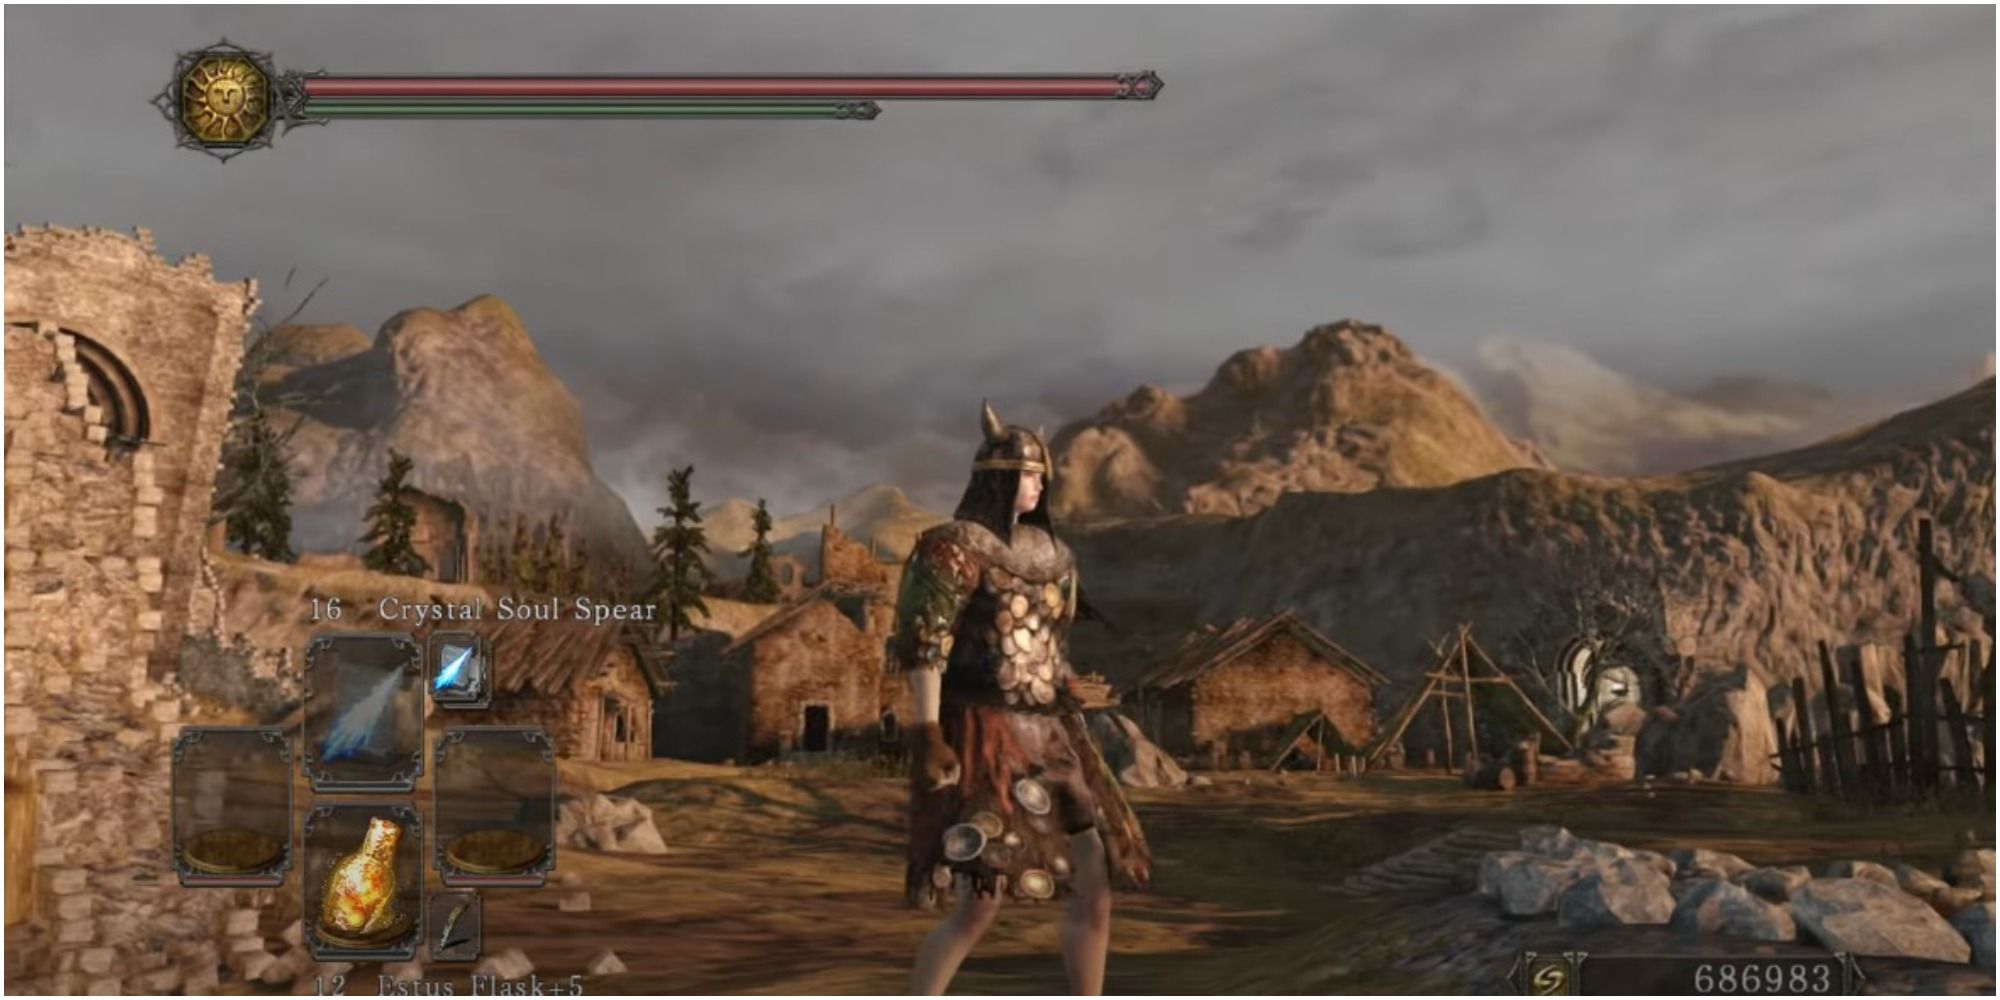 Dark Souls 2 Wearing The Gyrm Armor Set By A Cliff